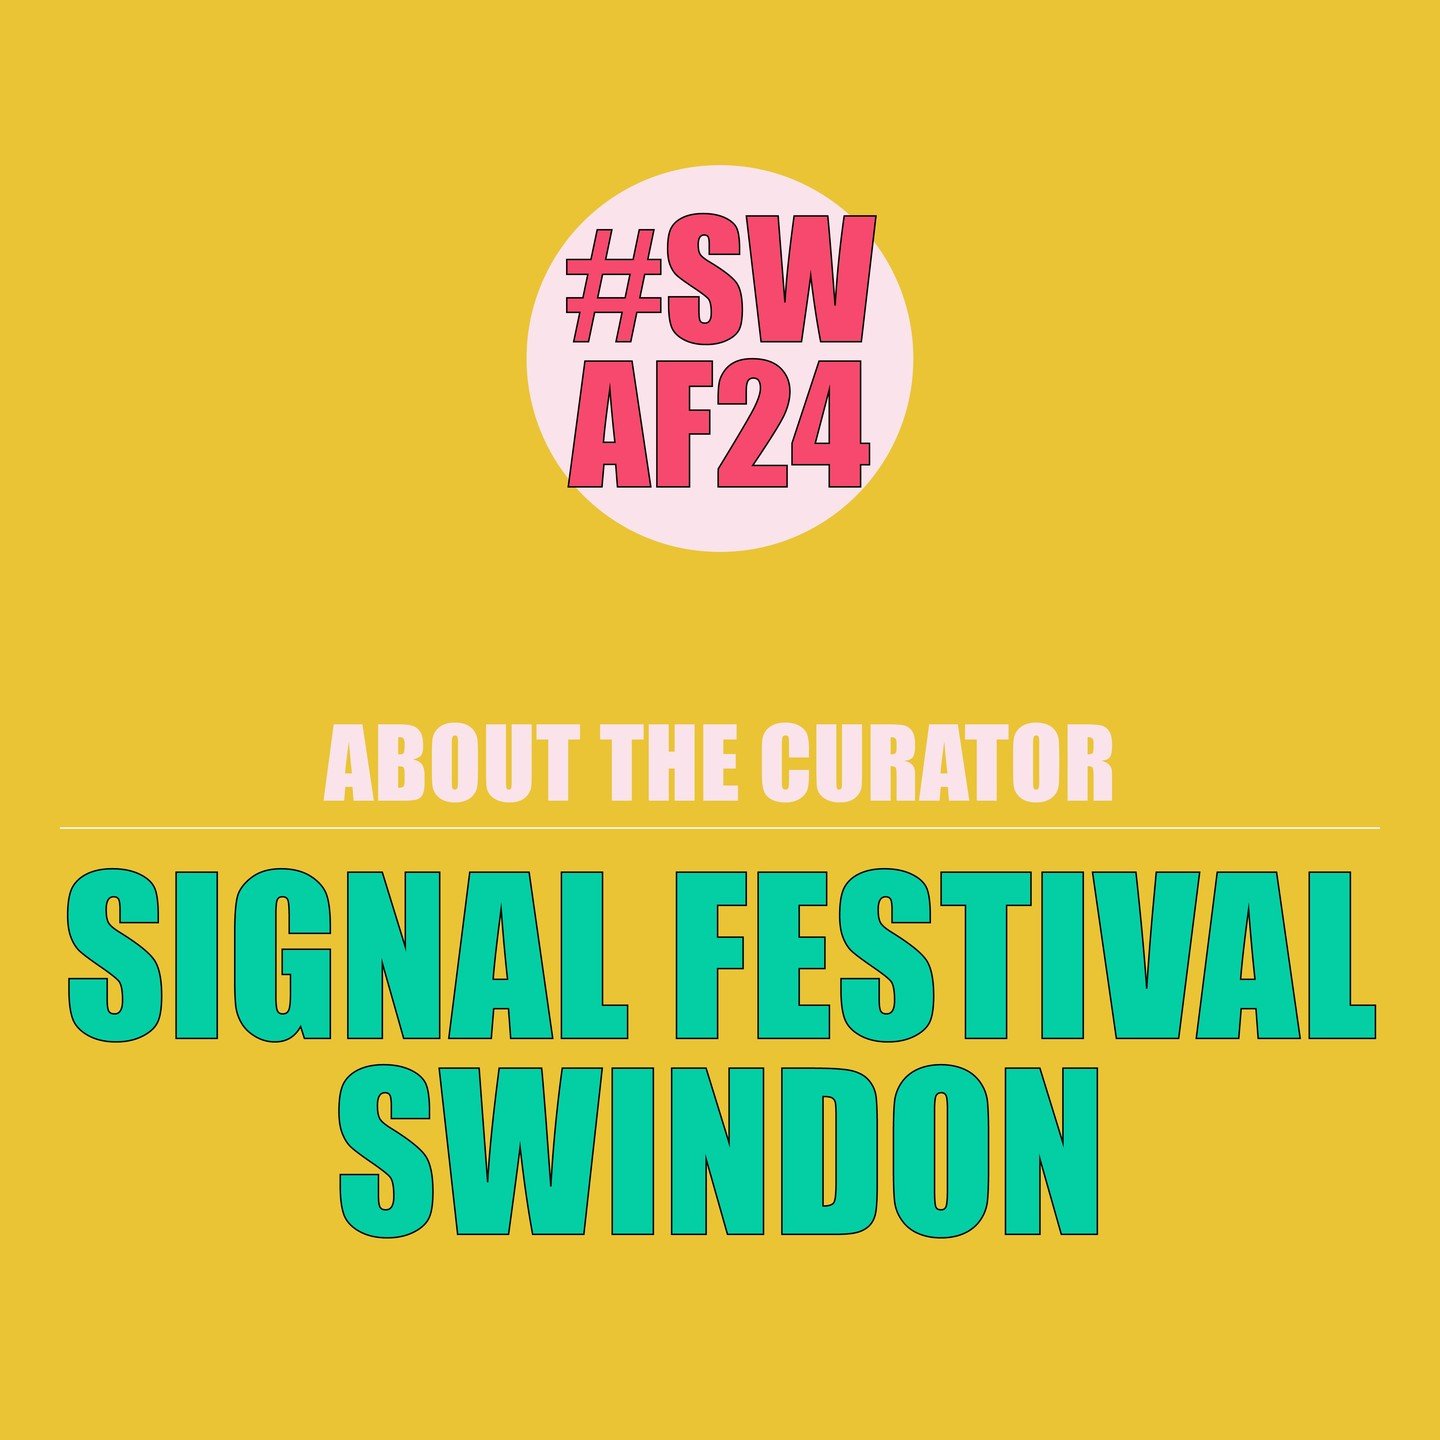 Exhibition: What does it mean to be young?
About The Curator: Signal Festival Swindon

Signal Festival Swindon is a radical showcase of youthful talent and creativity. We are six Producers aged between 20 and 28. Signal Festival Swindon is being mana